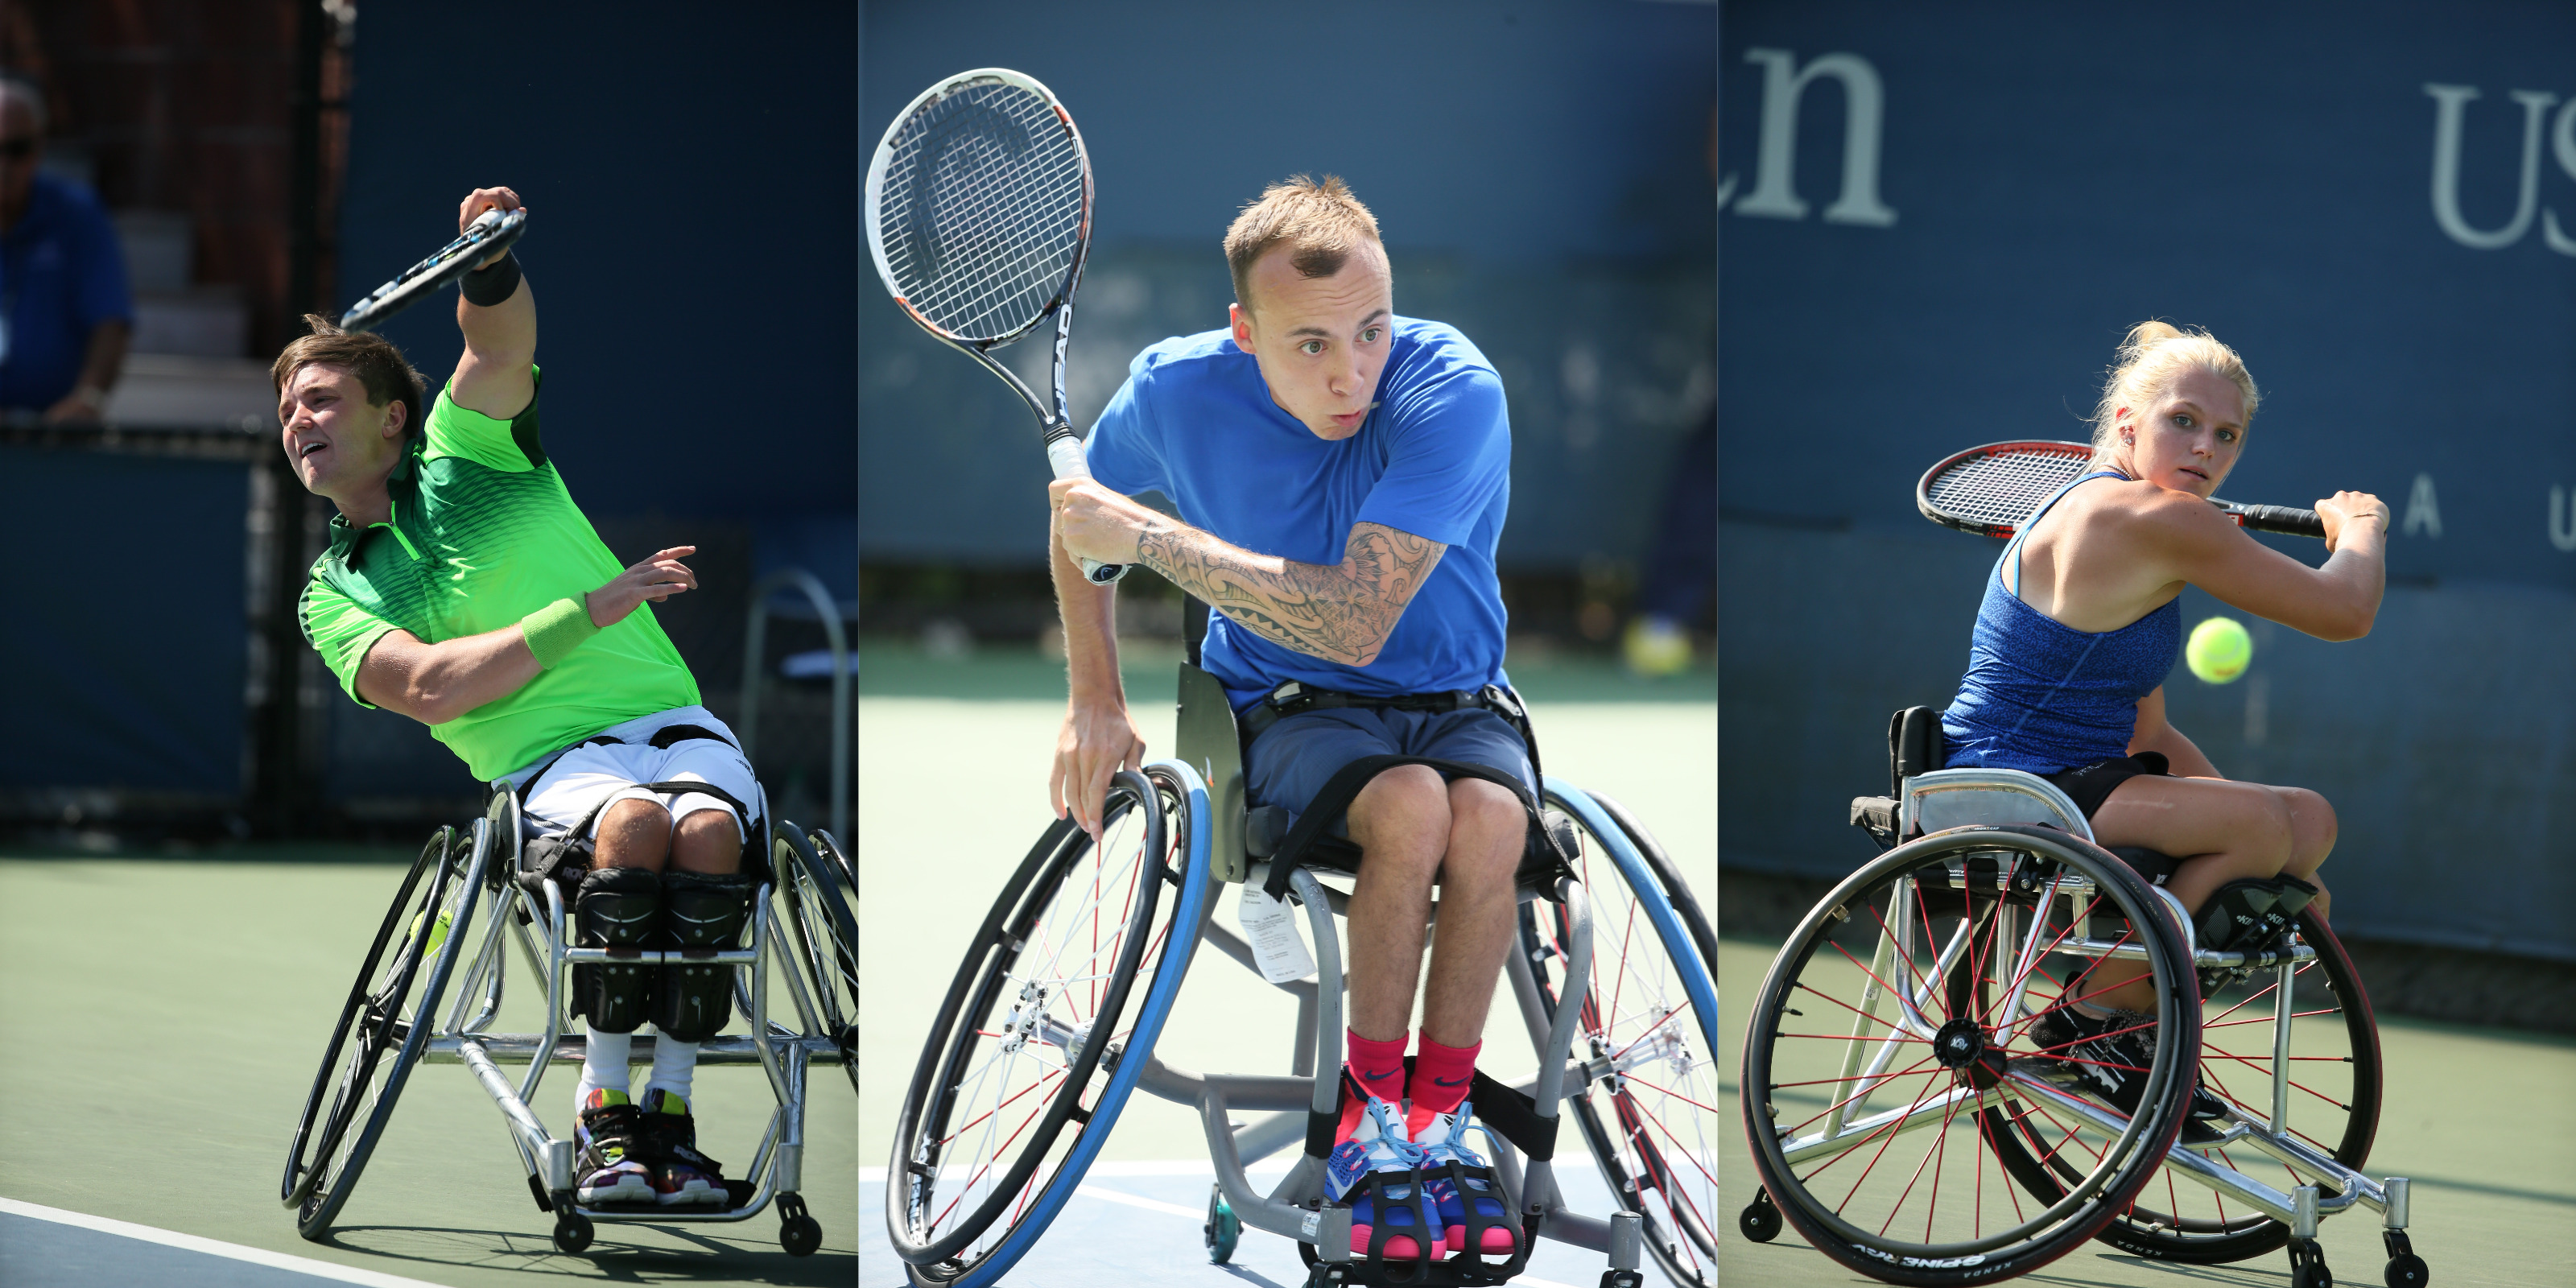 Find out more about our wheelchair tennis players